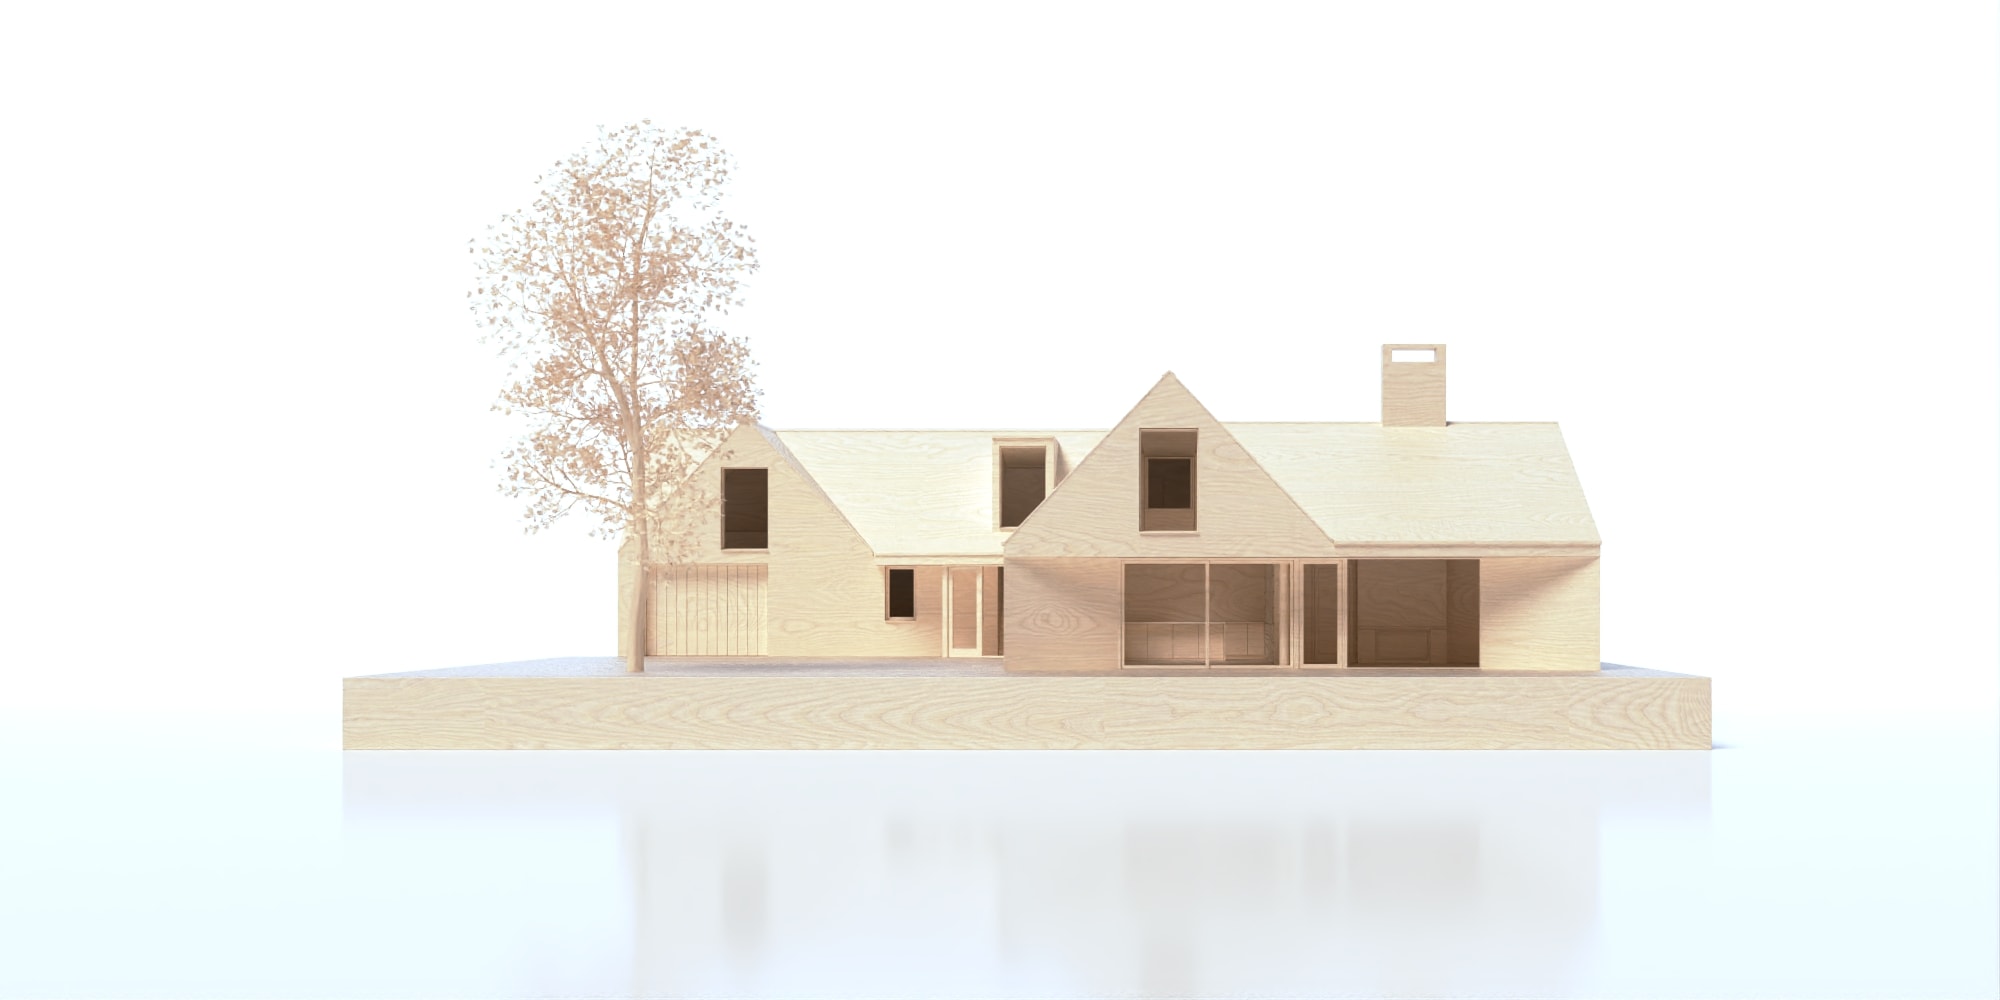 Reconstruction of dormer bungalow with dramatic gable elevation